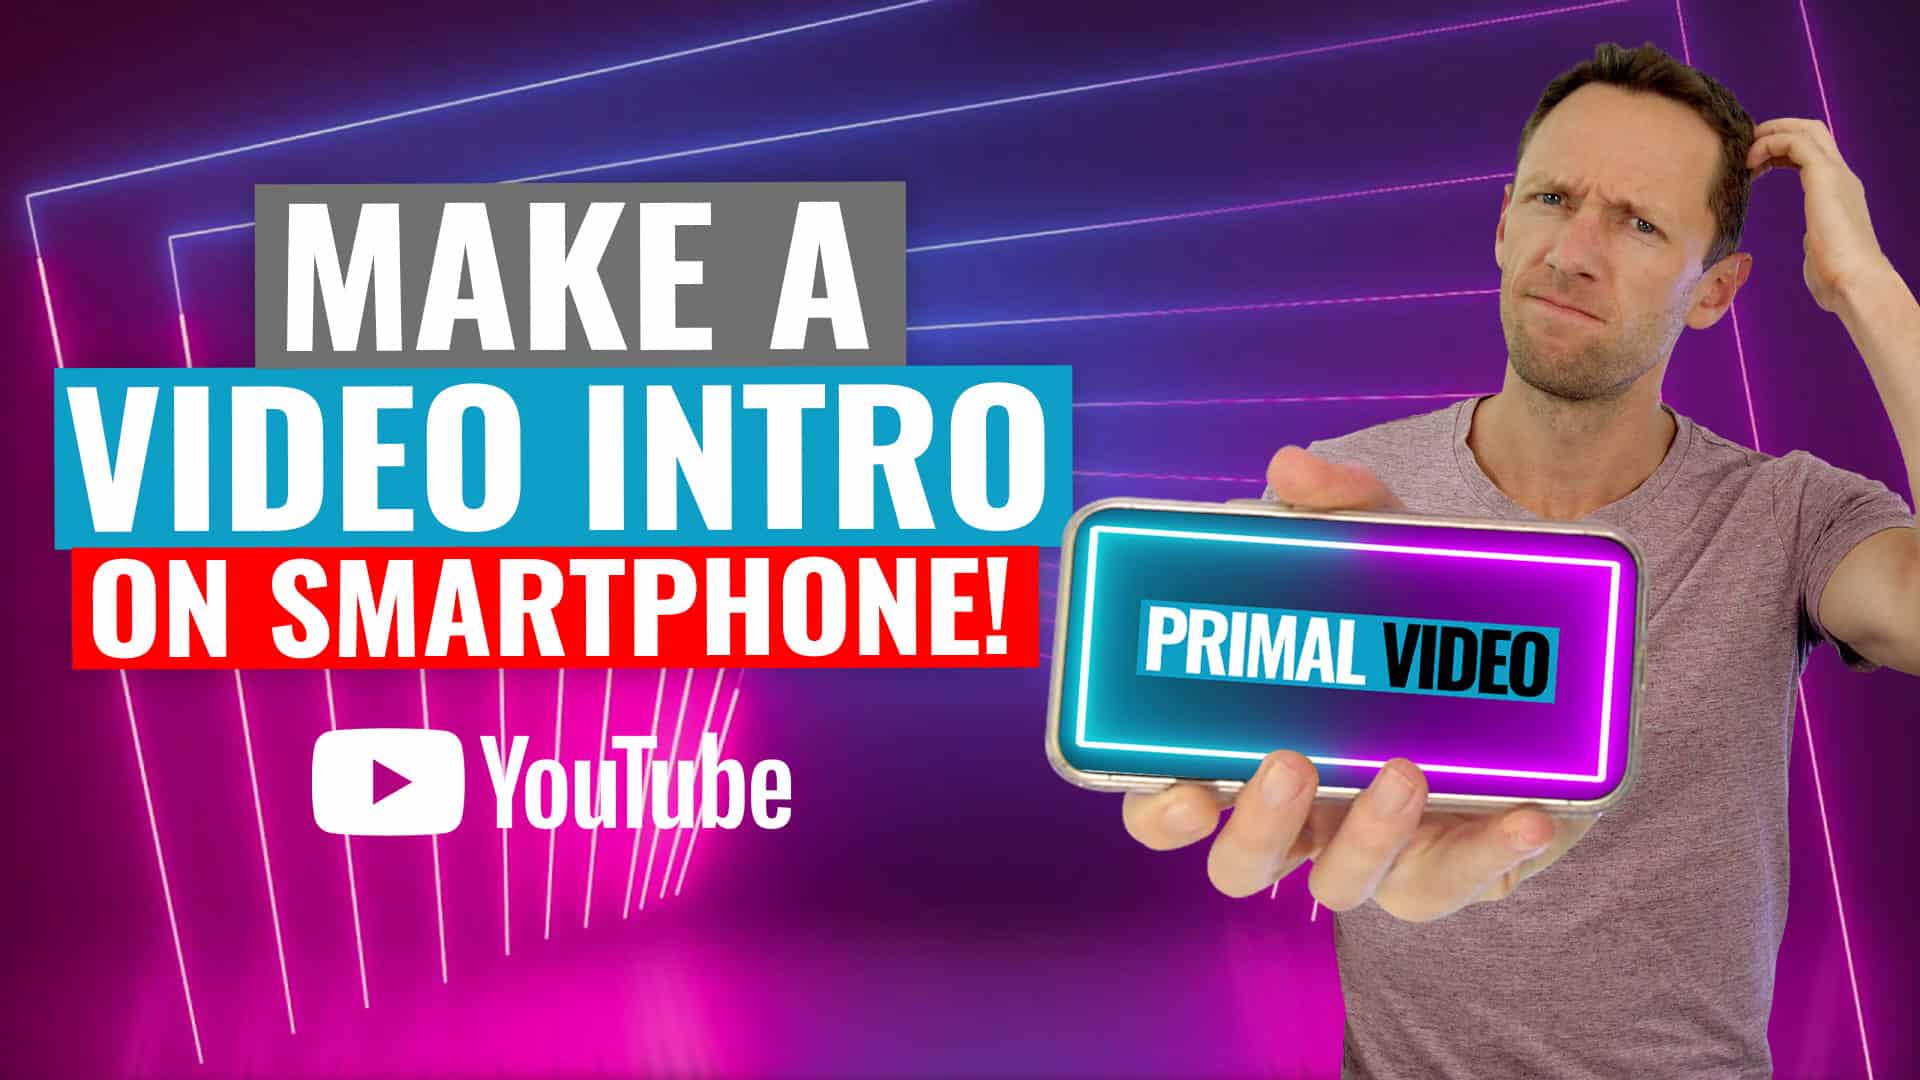 How to Make a Video Intro for YouTube on SMARTPHONE (iPhone & Android!)